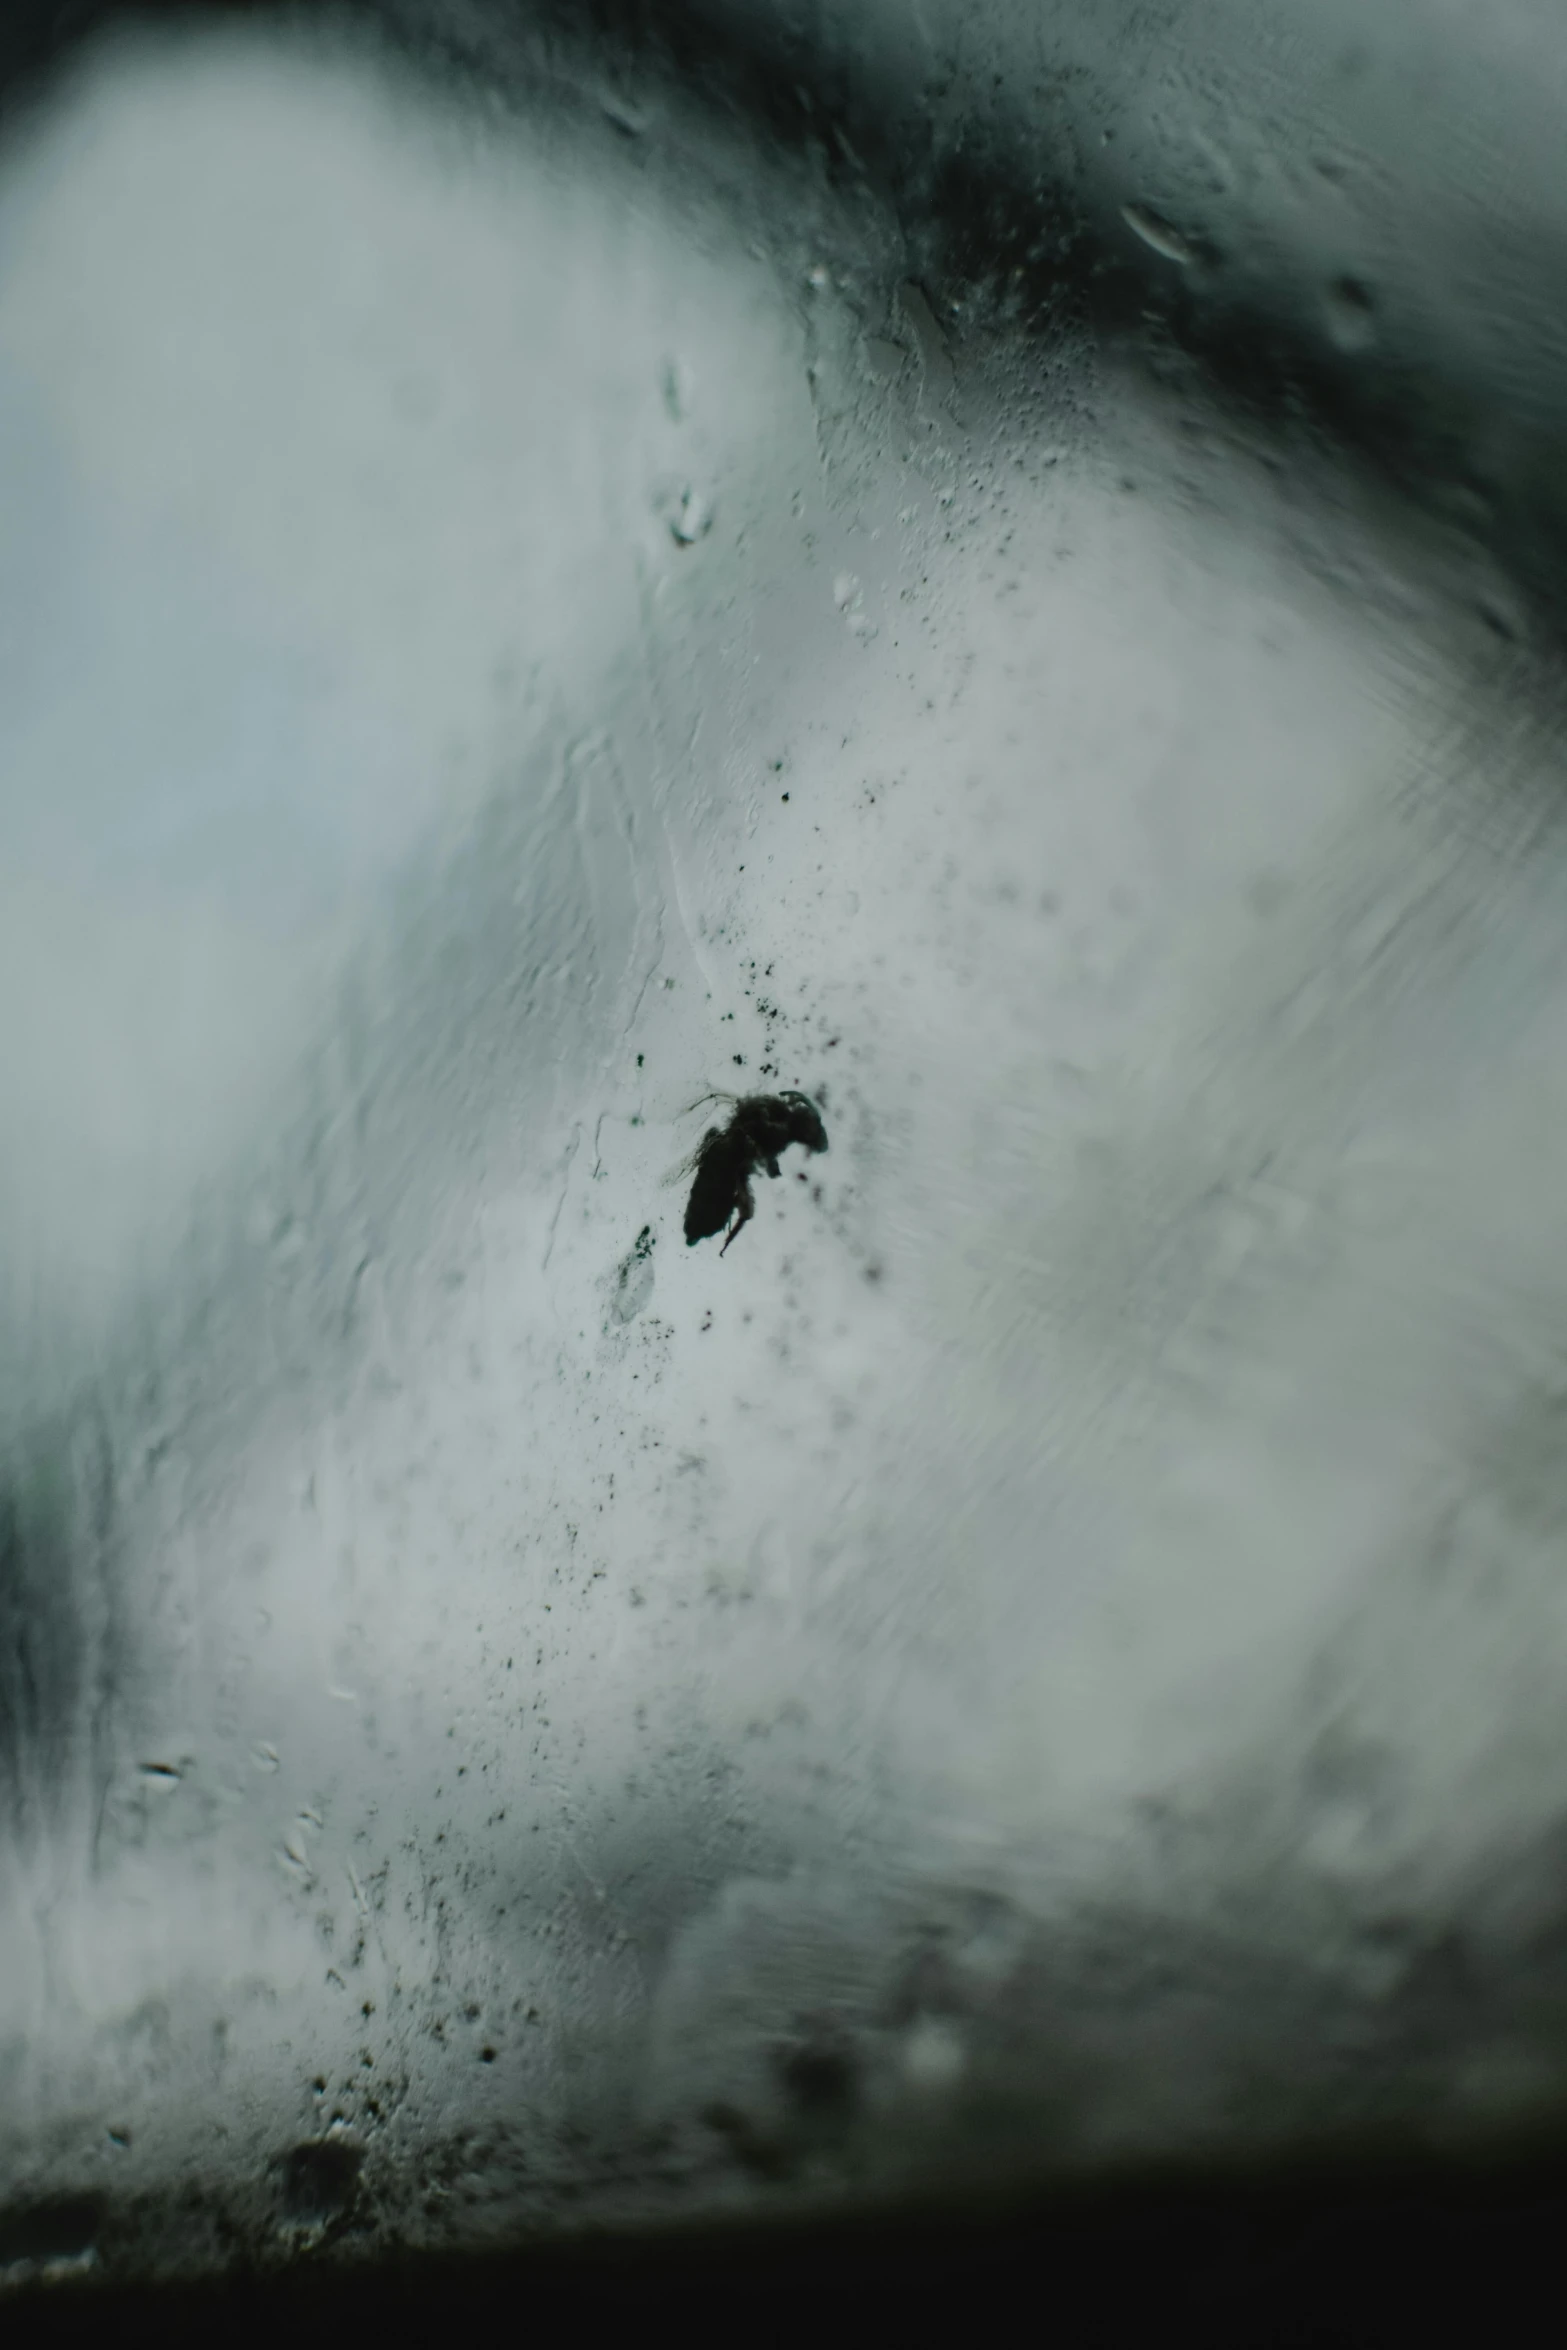 a bug that is sitting on a window sill, inspired by Vija Celmins, hurufiyya, transparent black windshield, in the astral plane ) ) ), cold stormy wind, shot from below